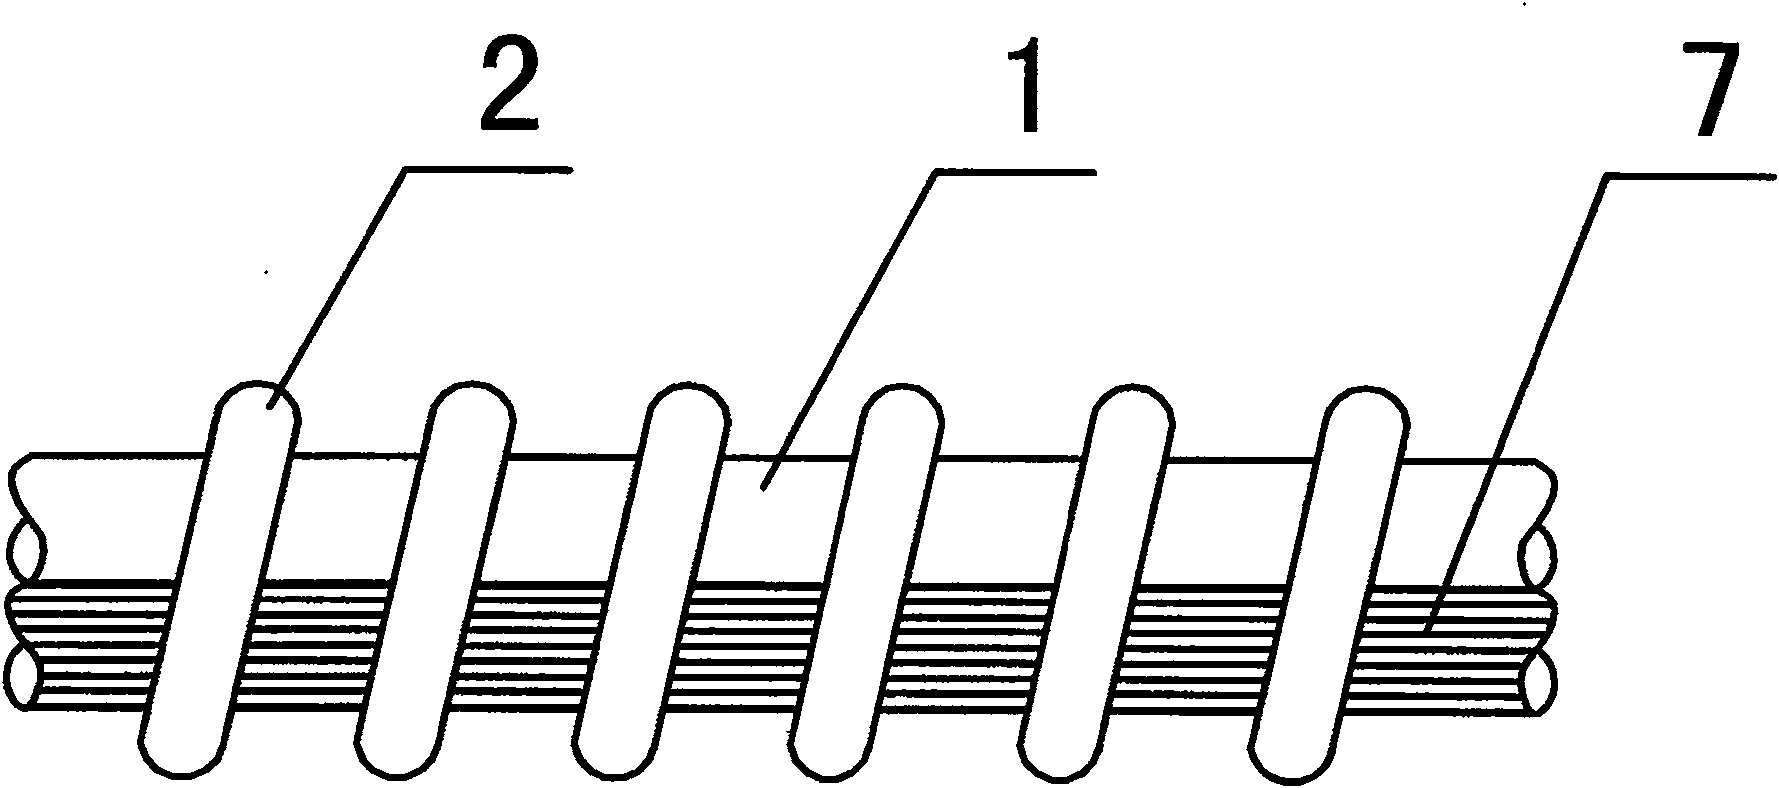 Double main thread master-slave type three-helix energy-saving lamp filament and manufacturing method thereof